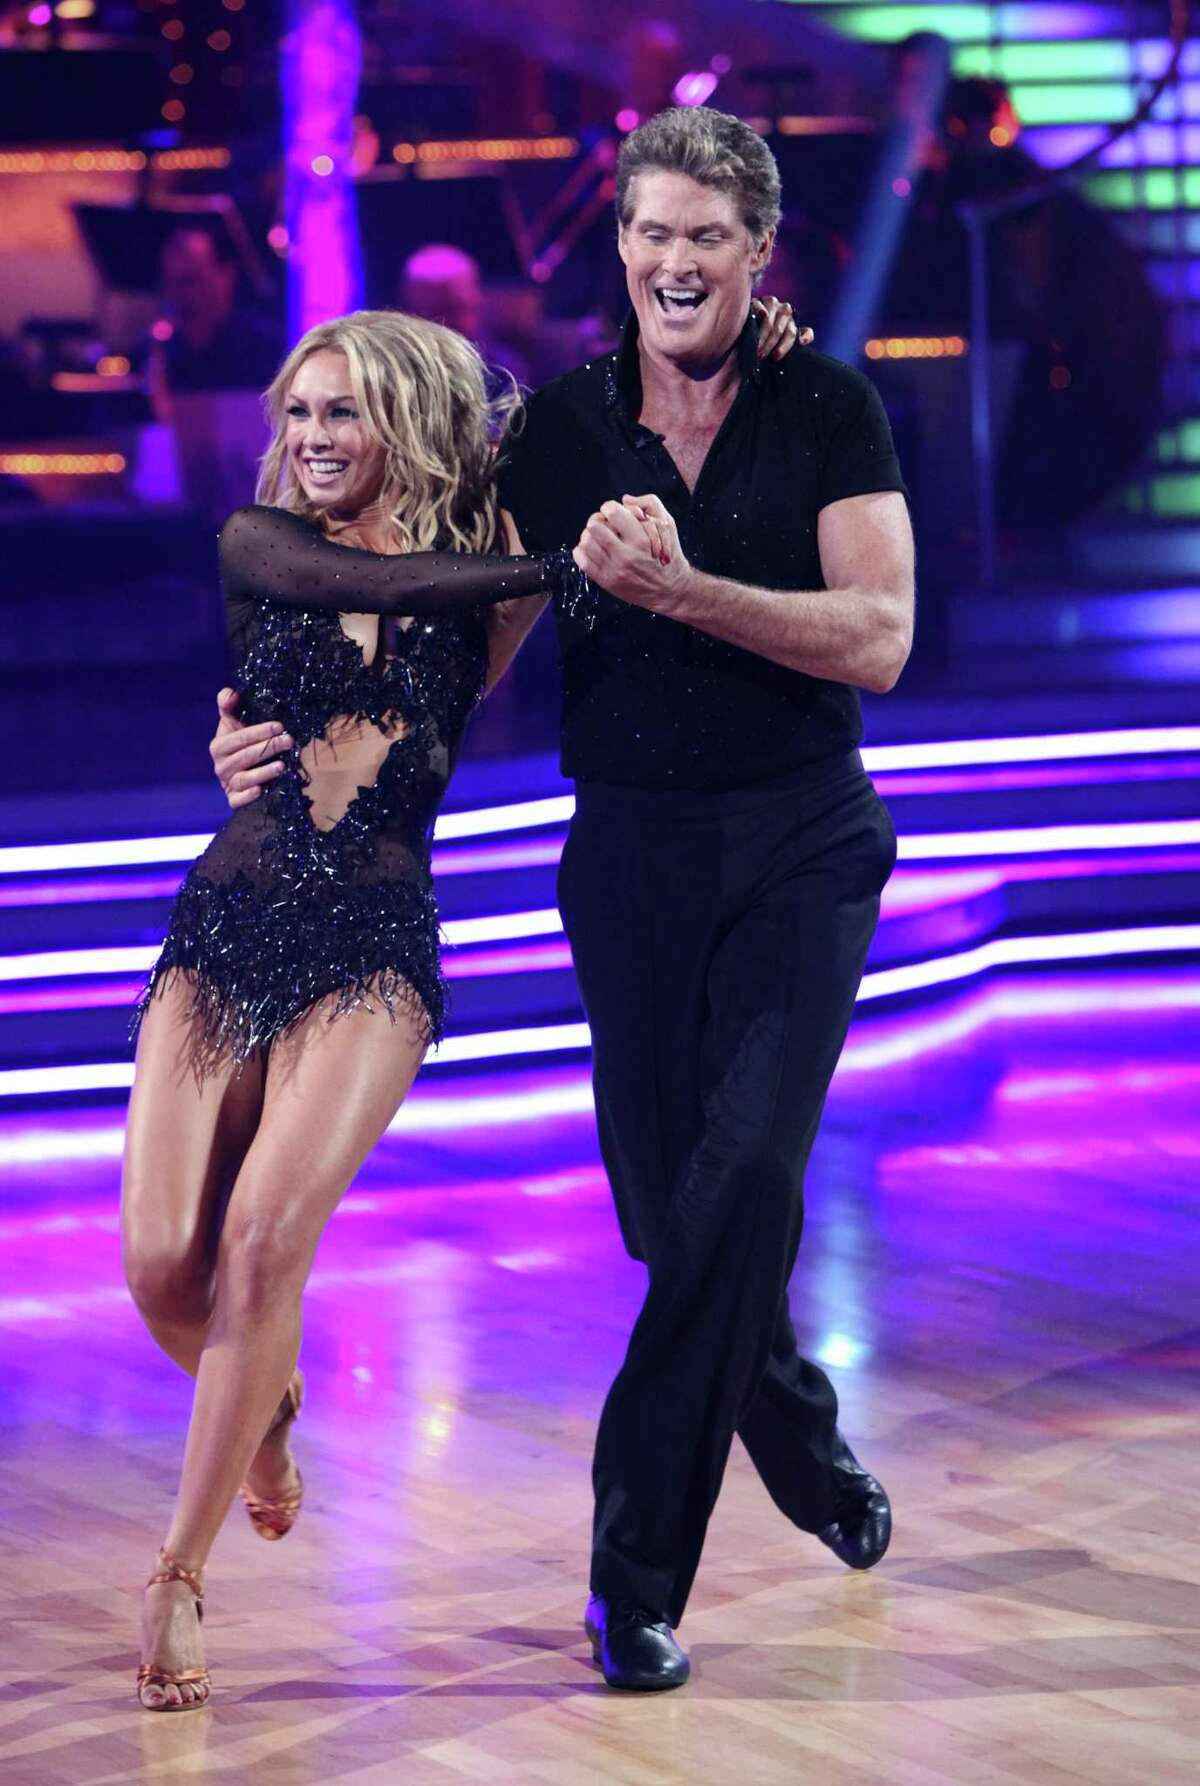 In this publicity image released by ABC, David Hasselhoff, right, and his partner Kym Johnson perform on the celebrity dance competition show, "Dancing with the Stars," on Monday, Sept. 20, 2010 in Los Angeles. (AP Photo/ABC, Adam Larkey)